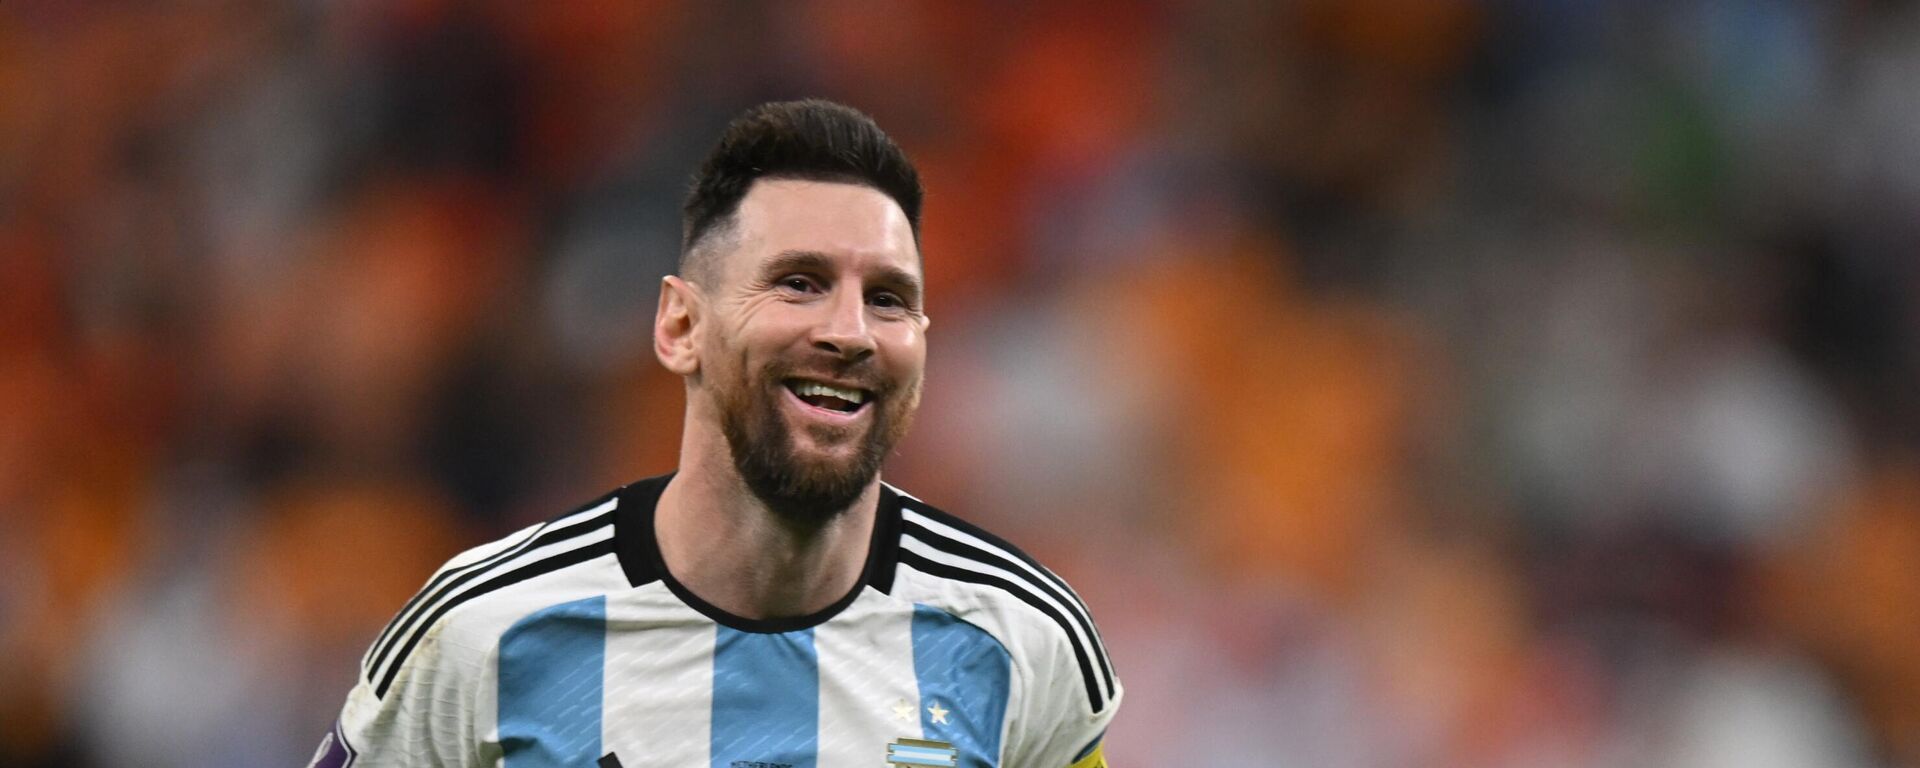 Lionel Messi during the match between Netherlands and Argentina at FIFA World Cup in Qatar - Sputnik India, 1920, 13.12.2022